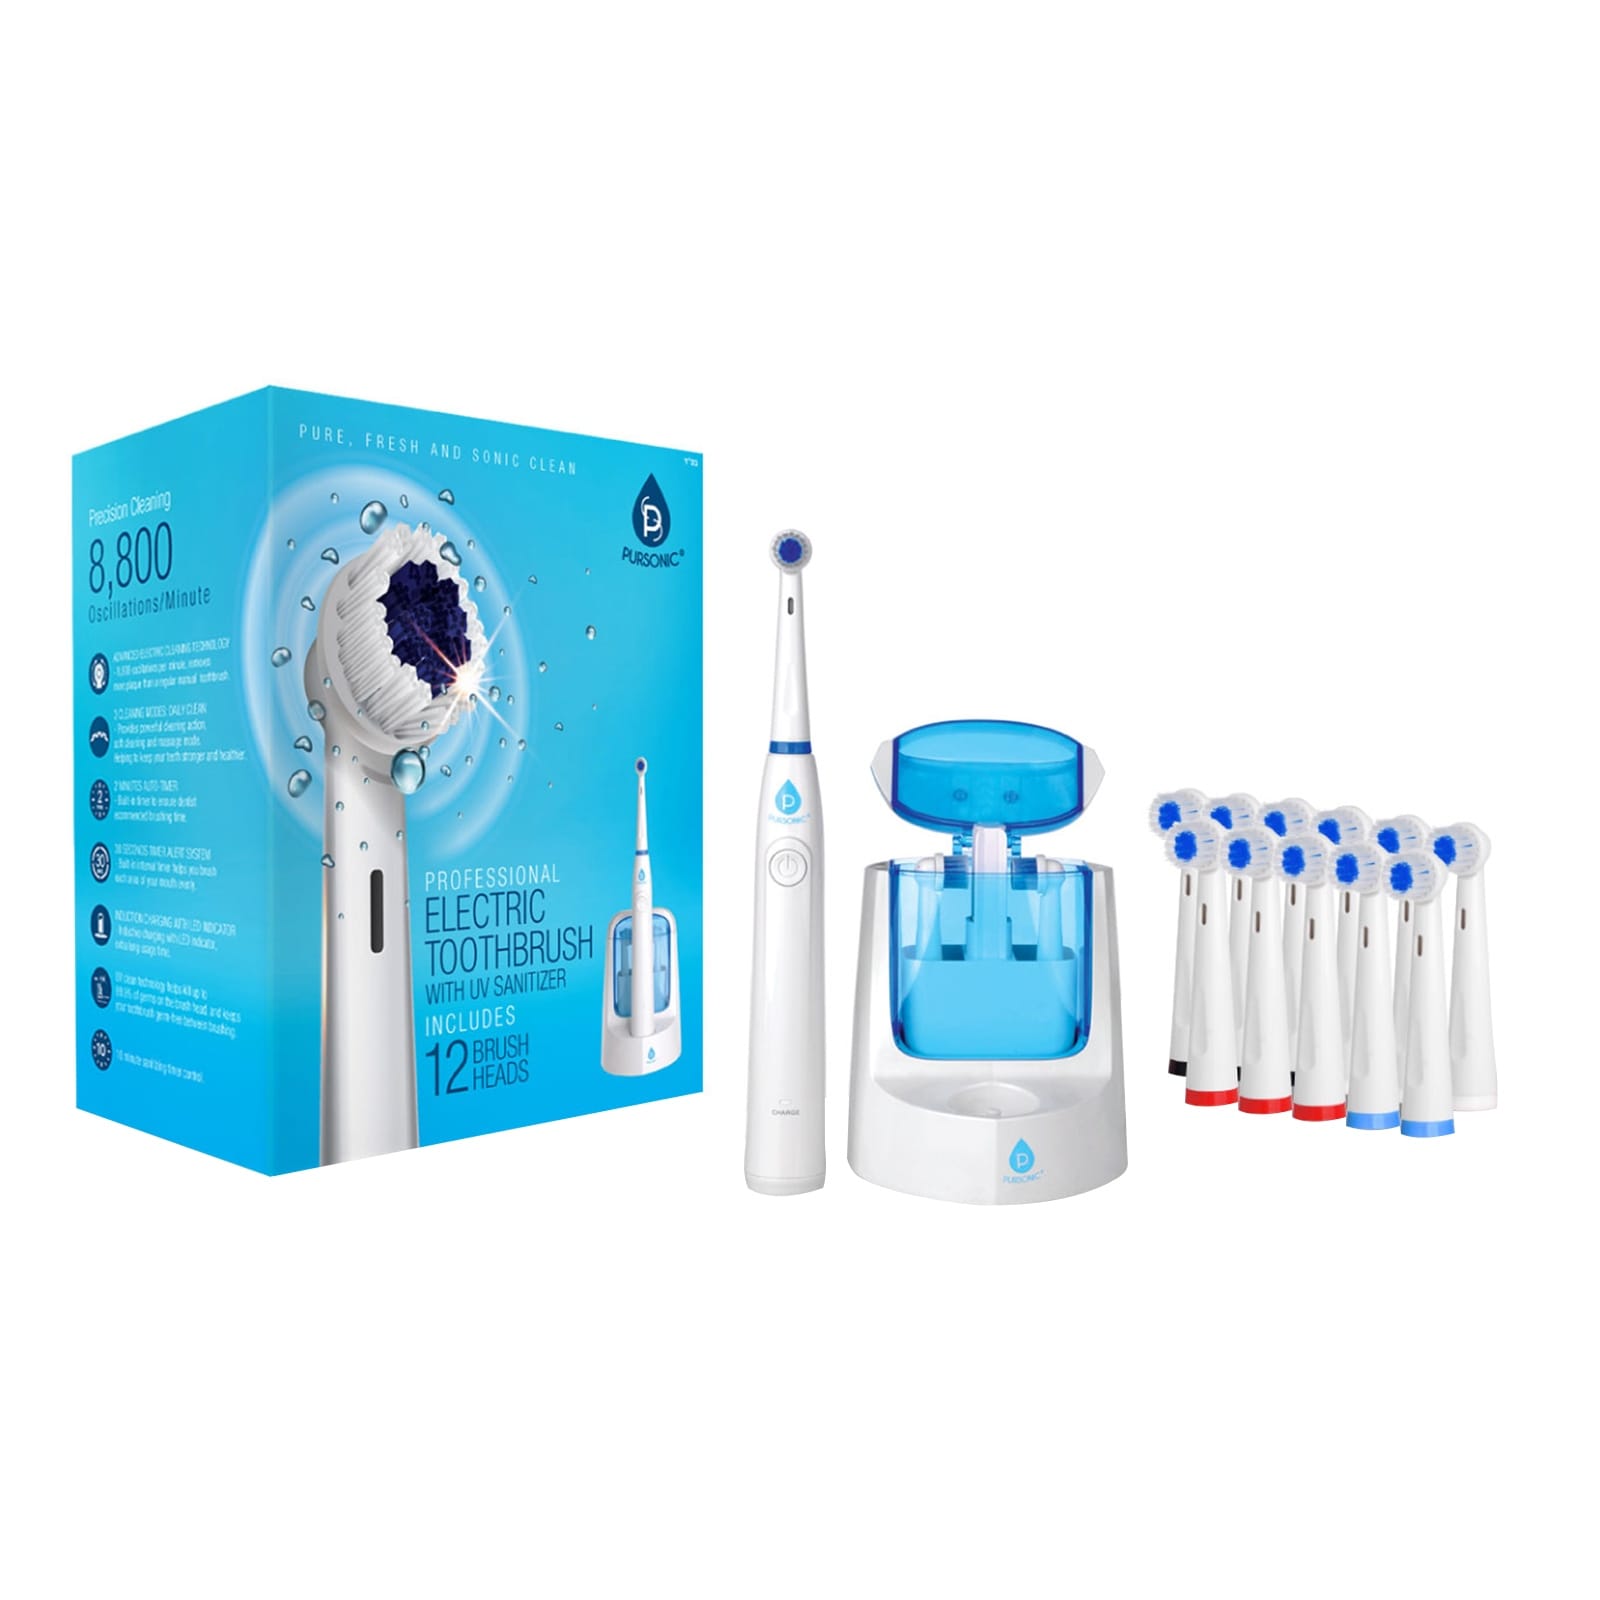 Pursonic Oscilatting electric Rechargeable Toothbrush - White